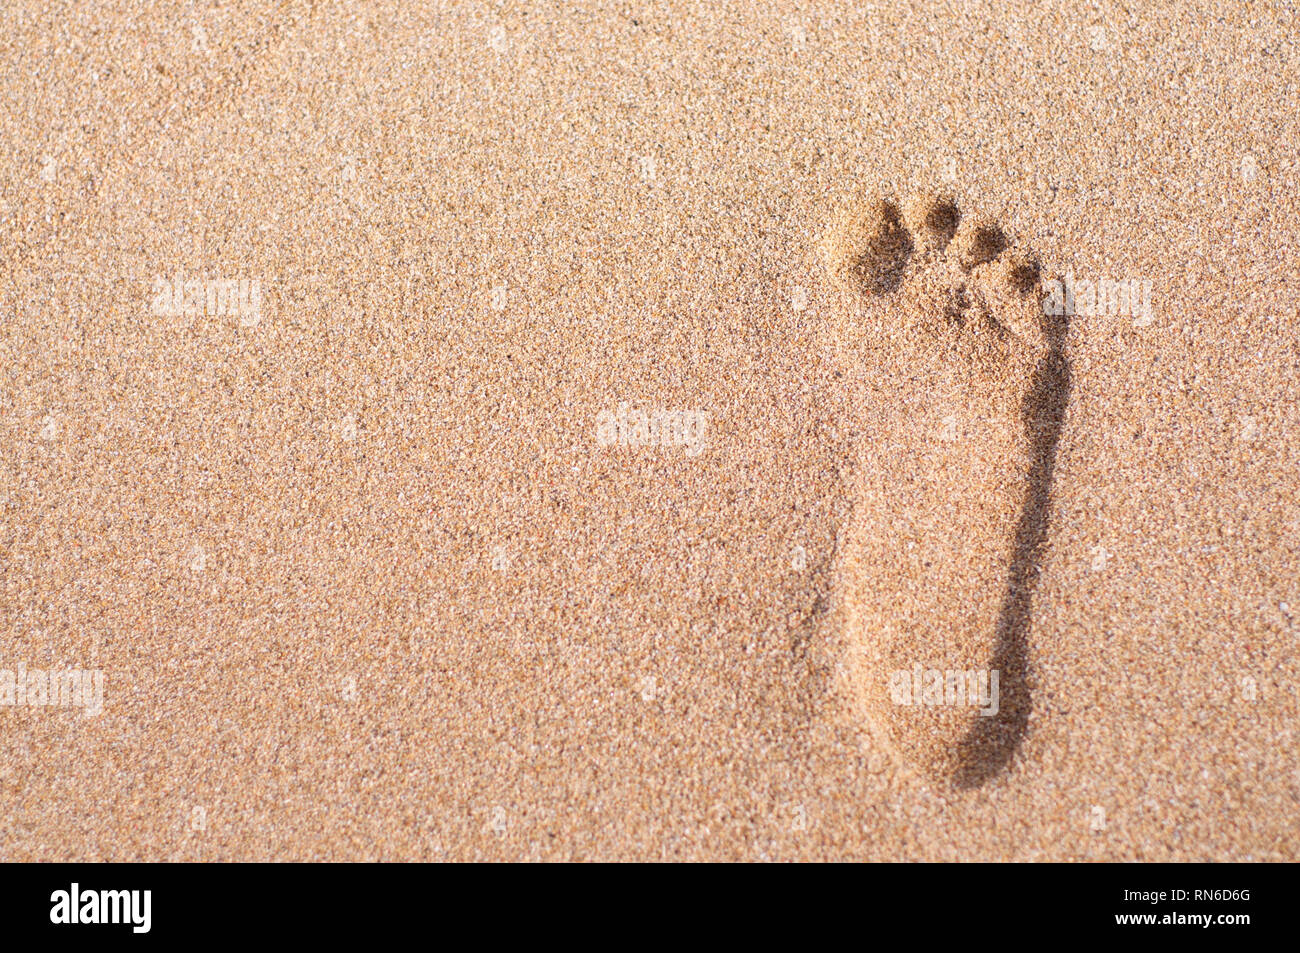 A single man's footprint captured on the beach of Sanur in Bali, Indonesia Stock Photo